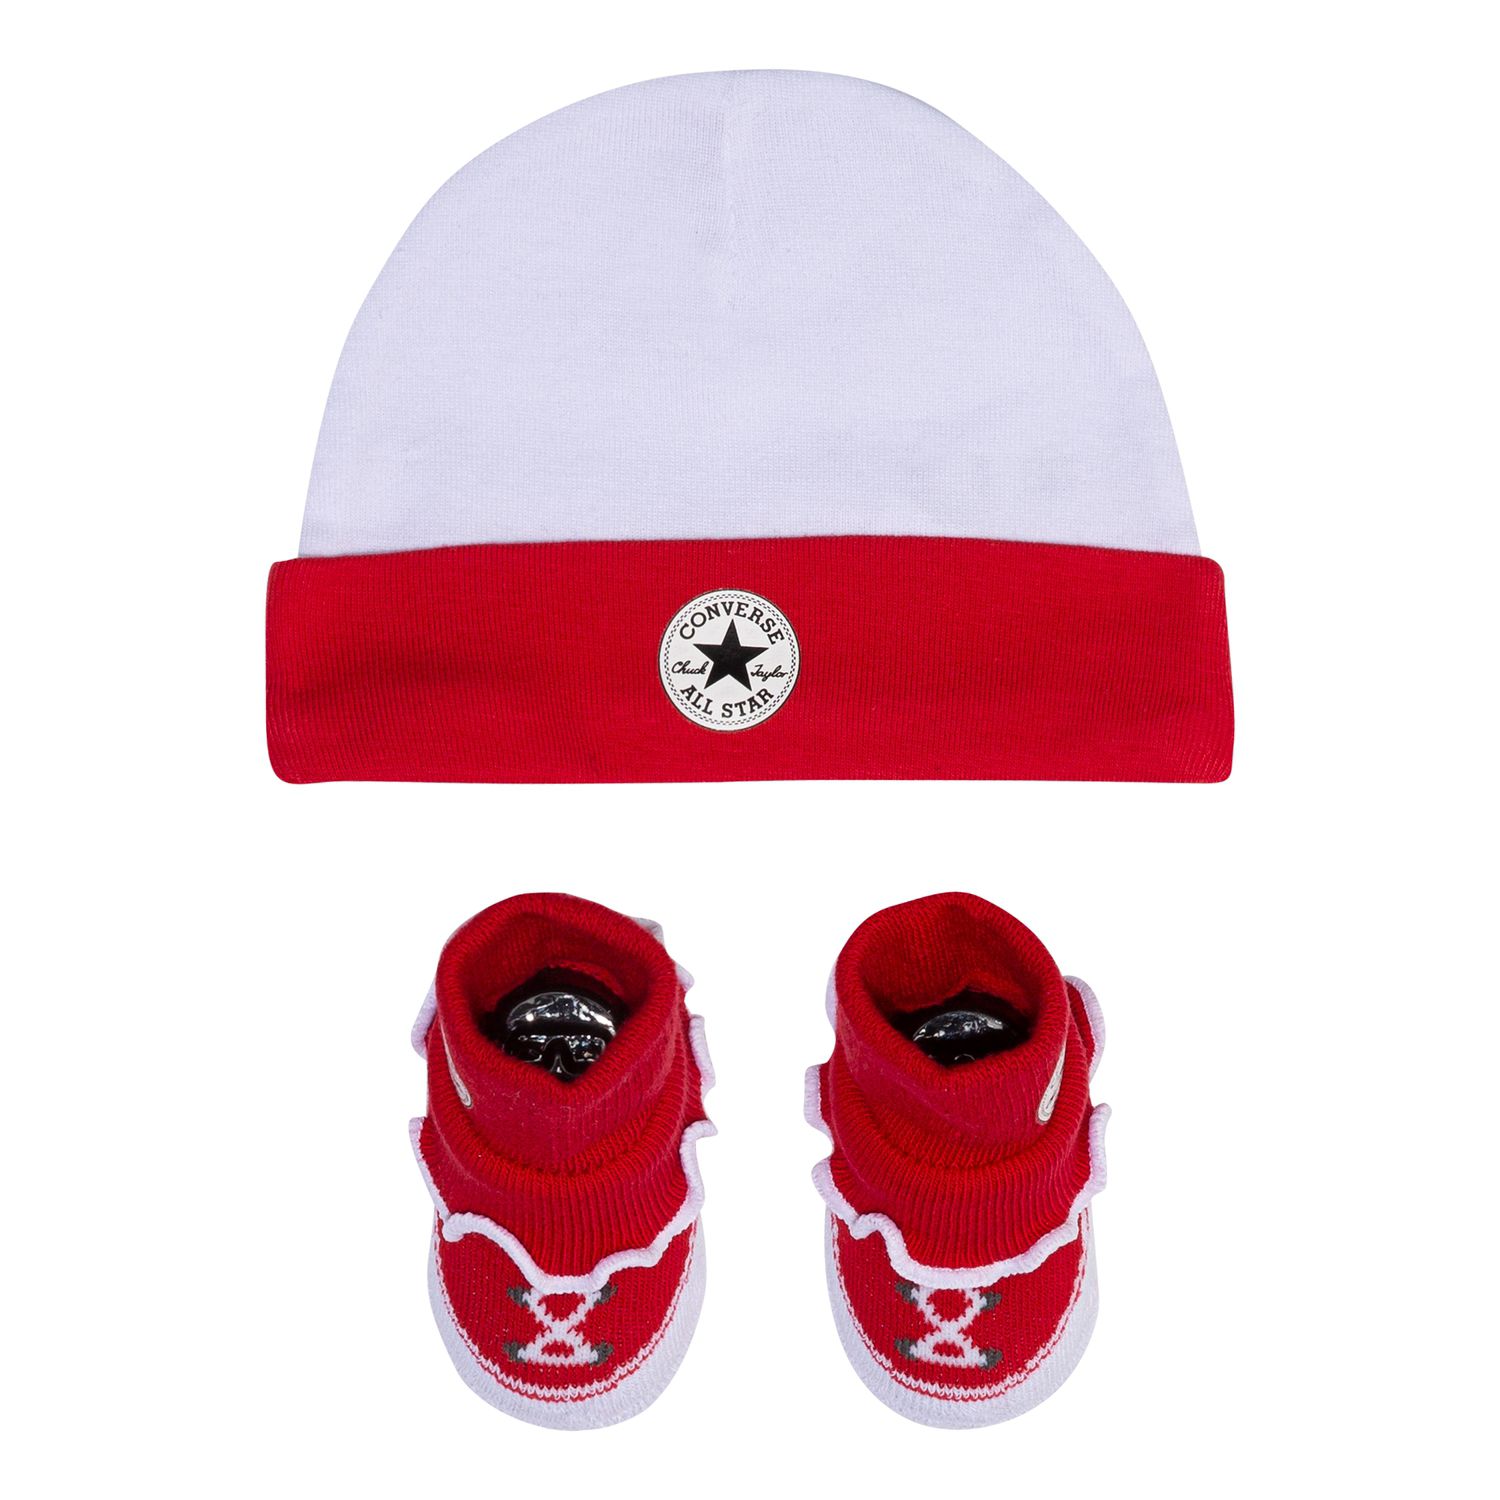 converse baby hat and socks